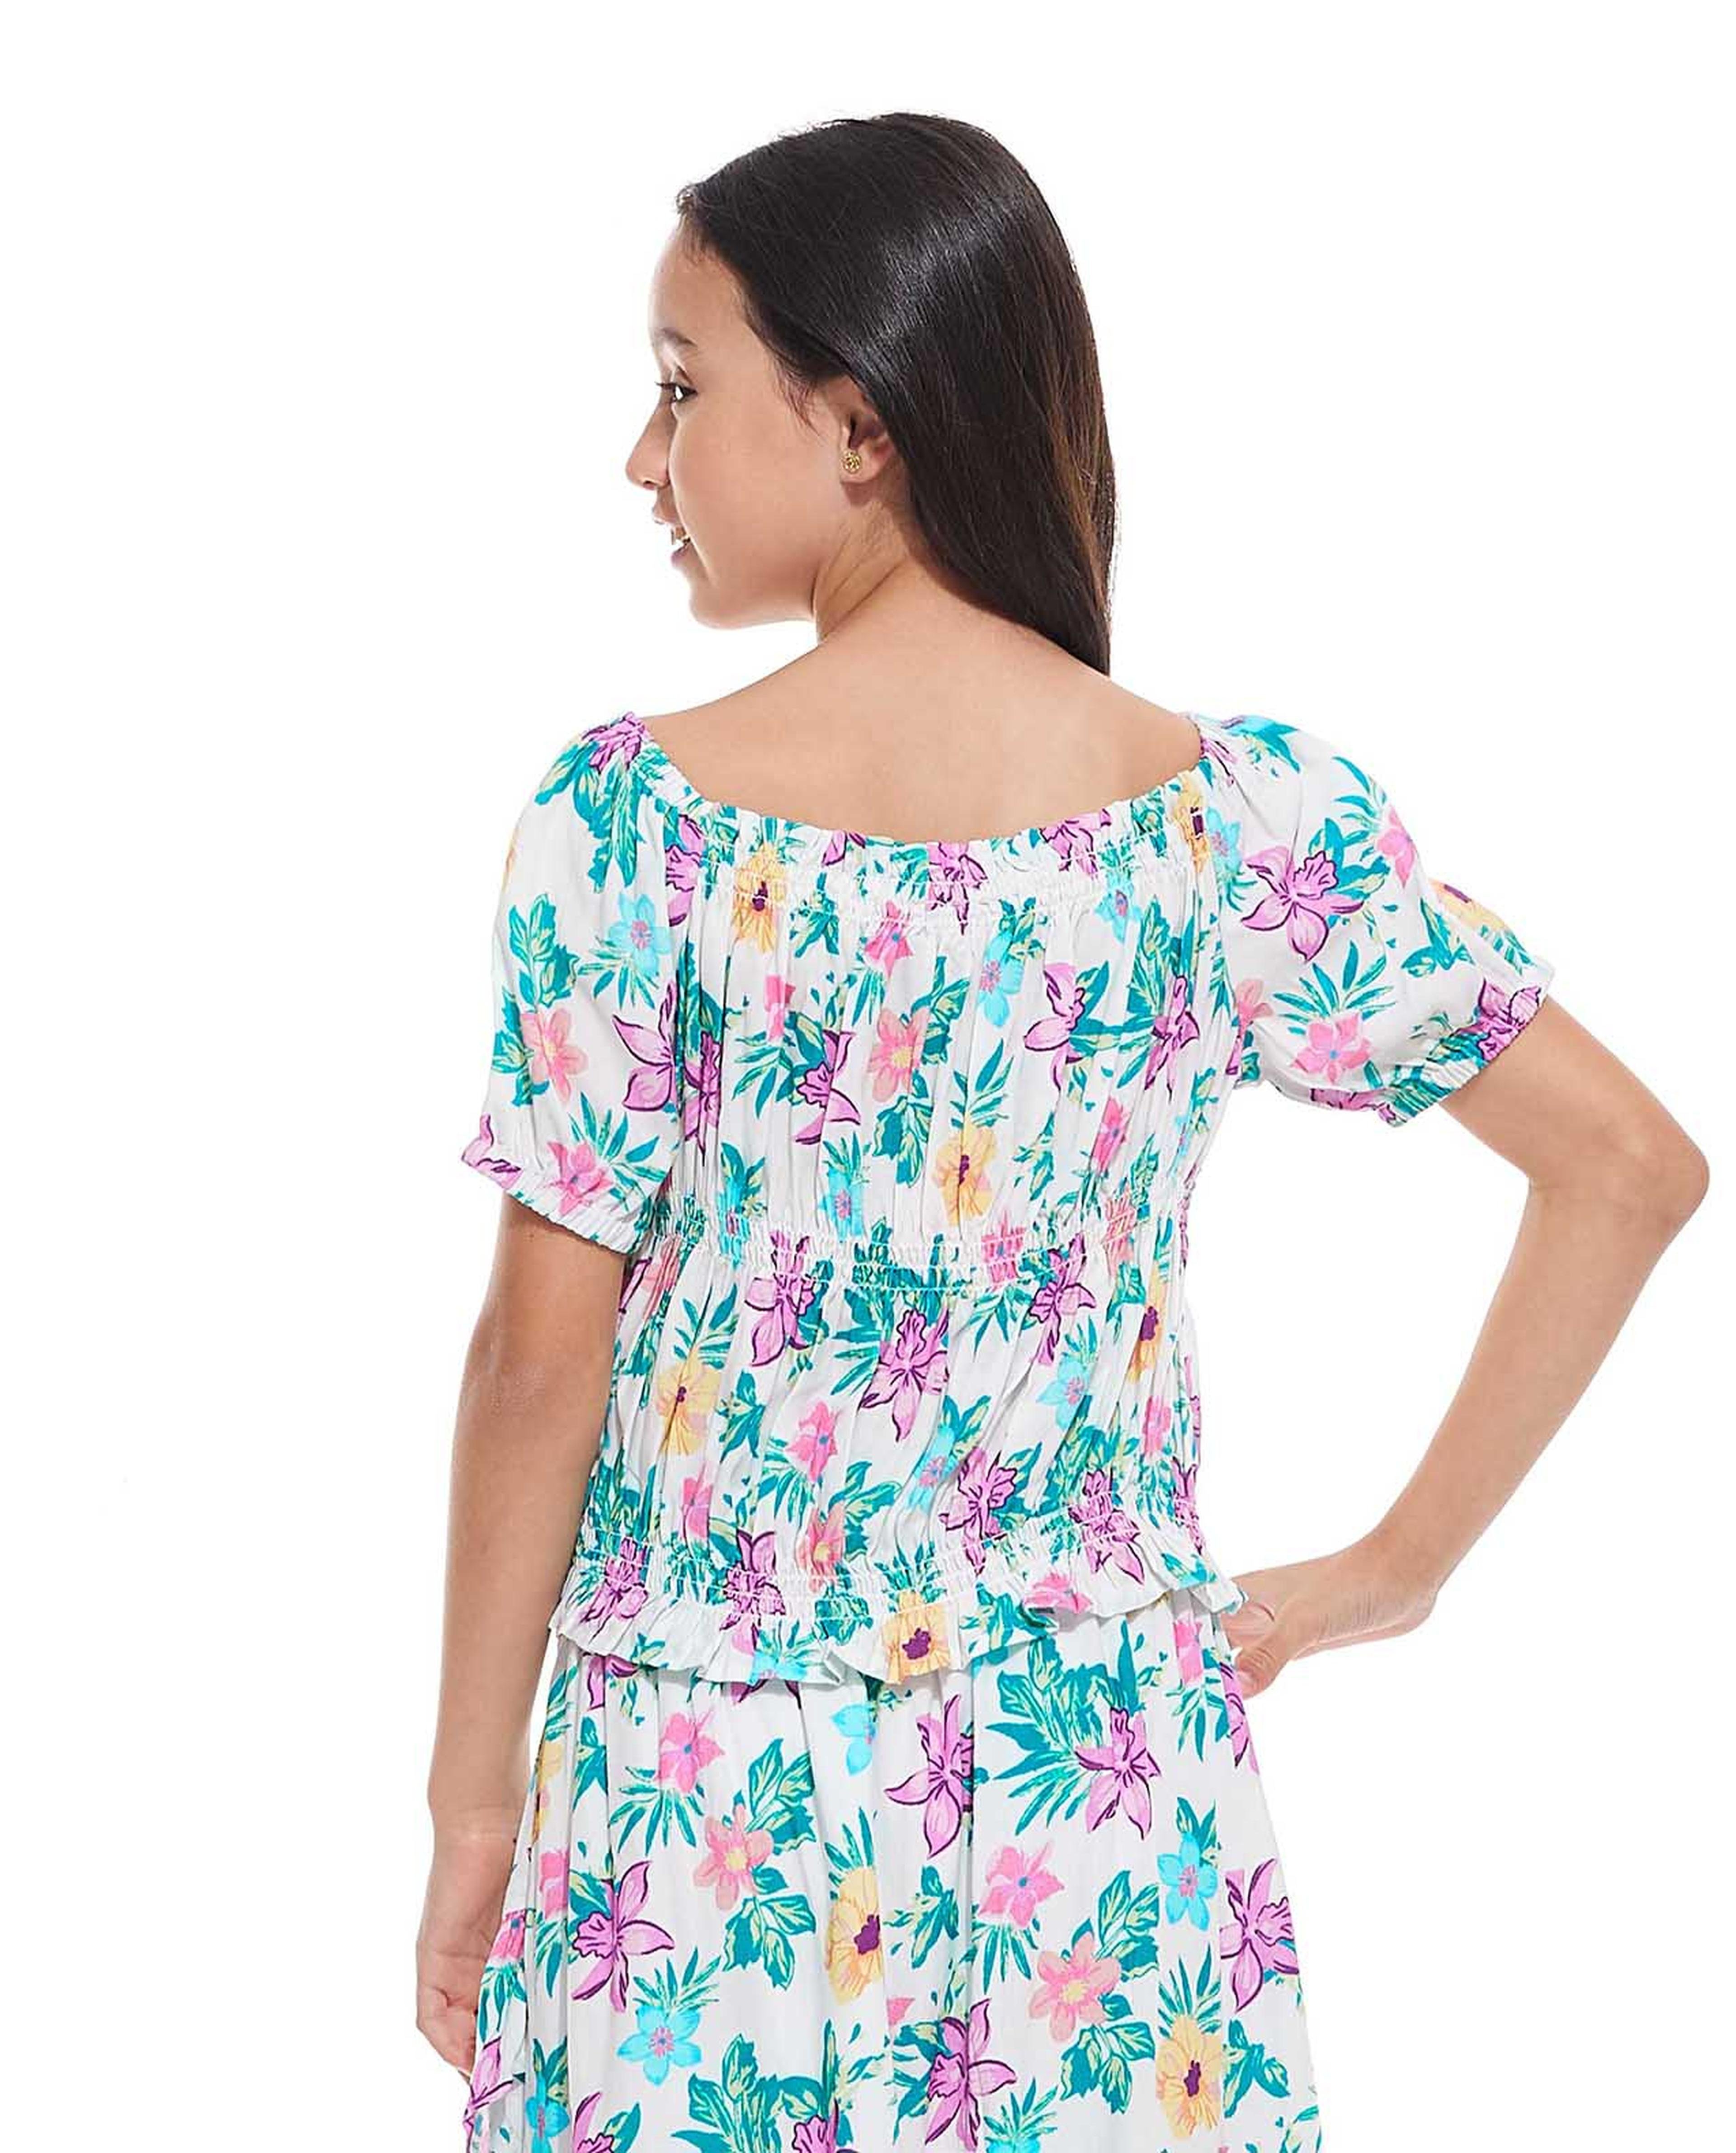 Floral Print Top with Round Neck and Short Sleeves